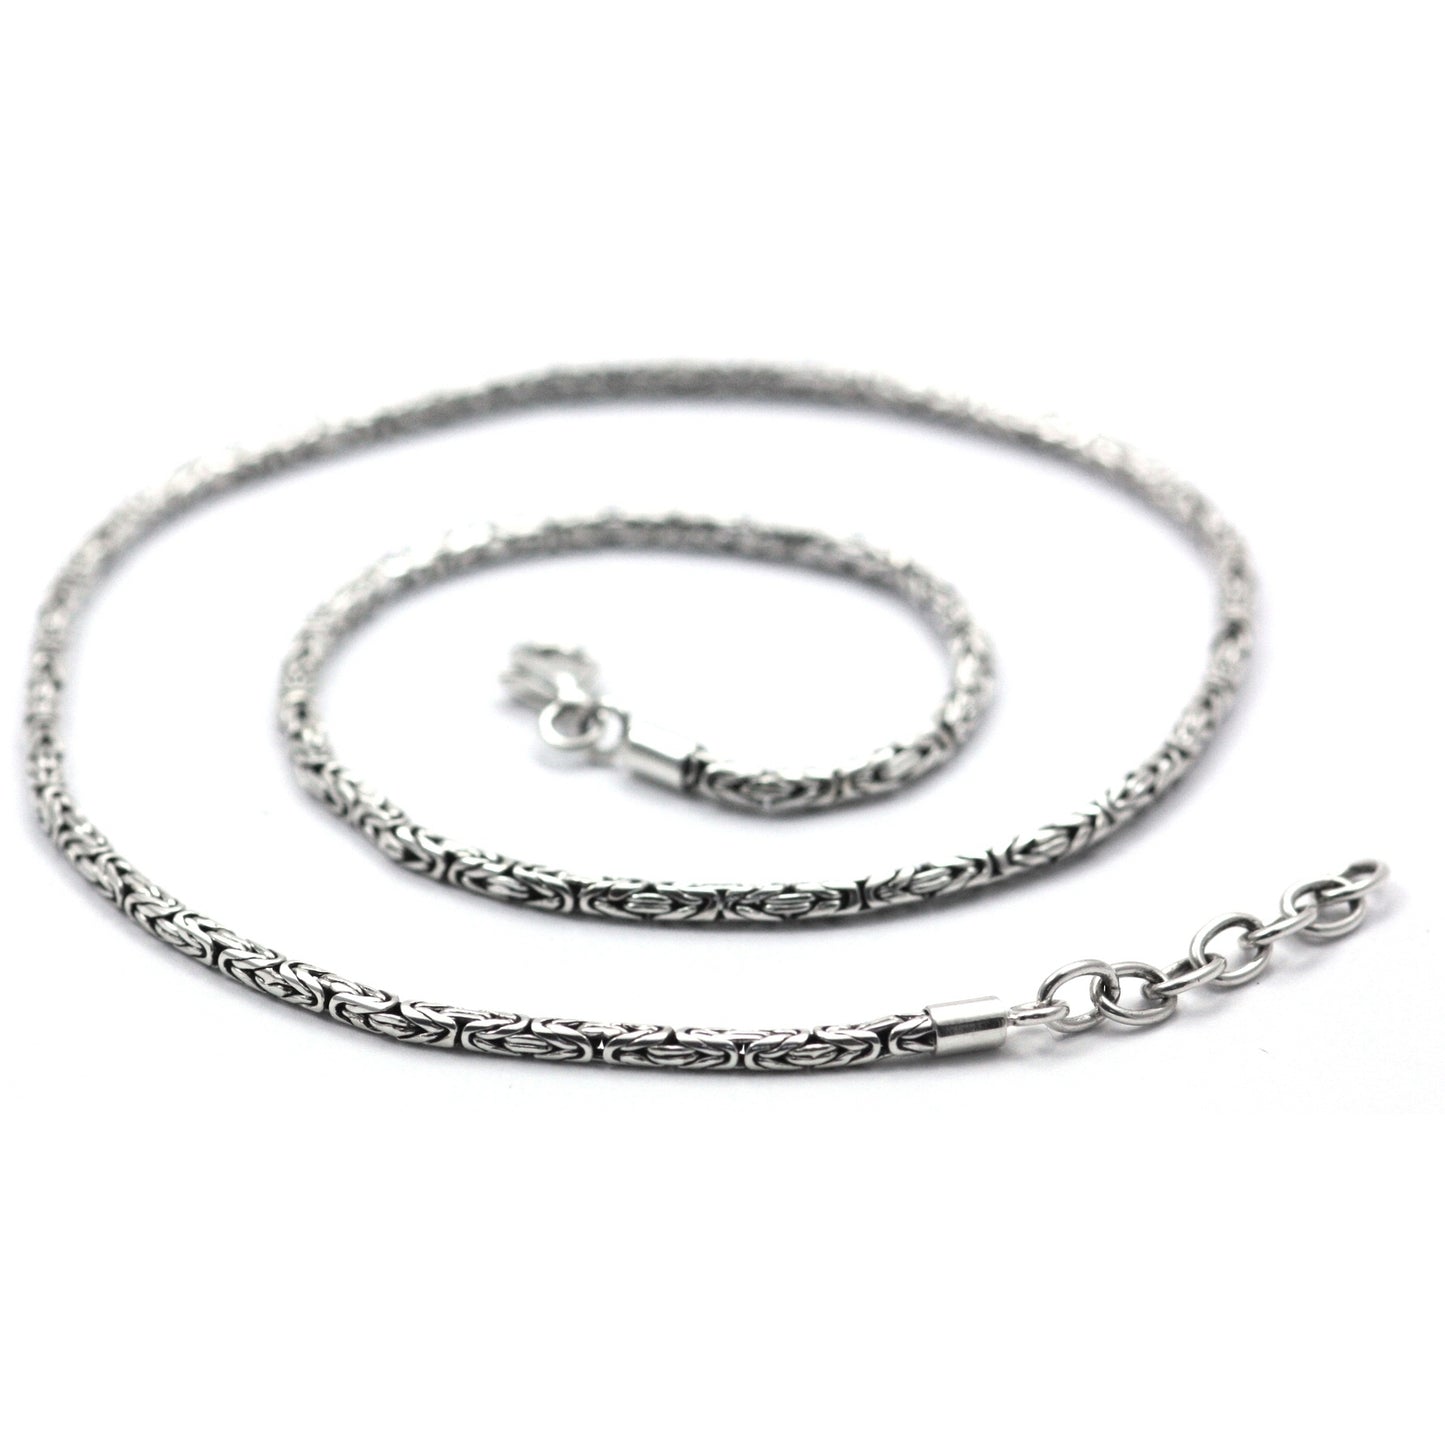 Silver byzantine chain necklace with a swivel lobster clasp and a ring link extender chain.